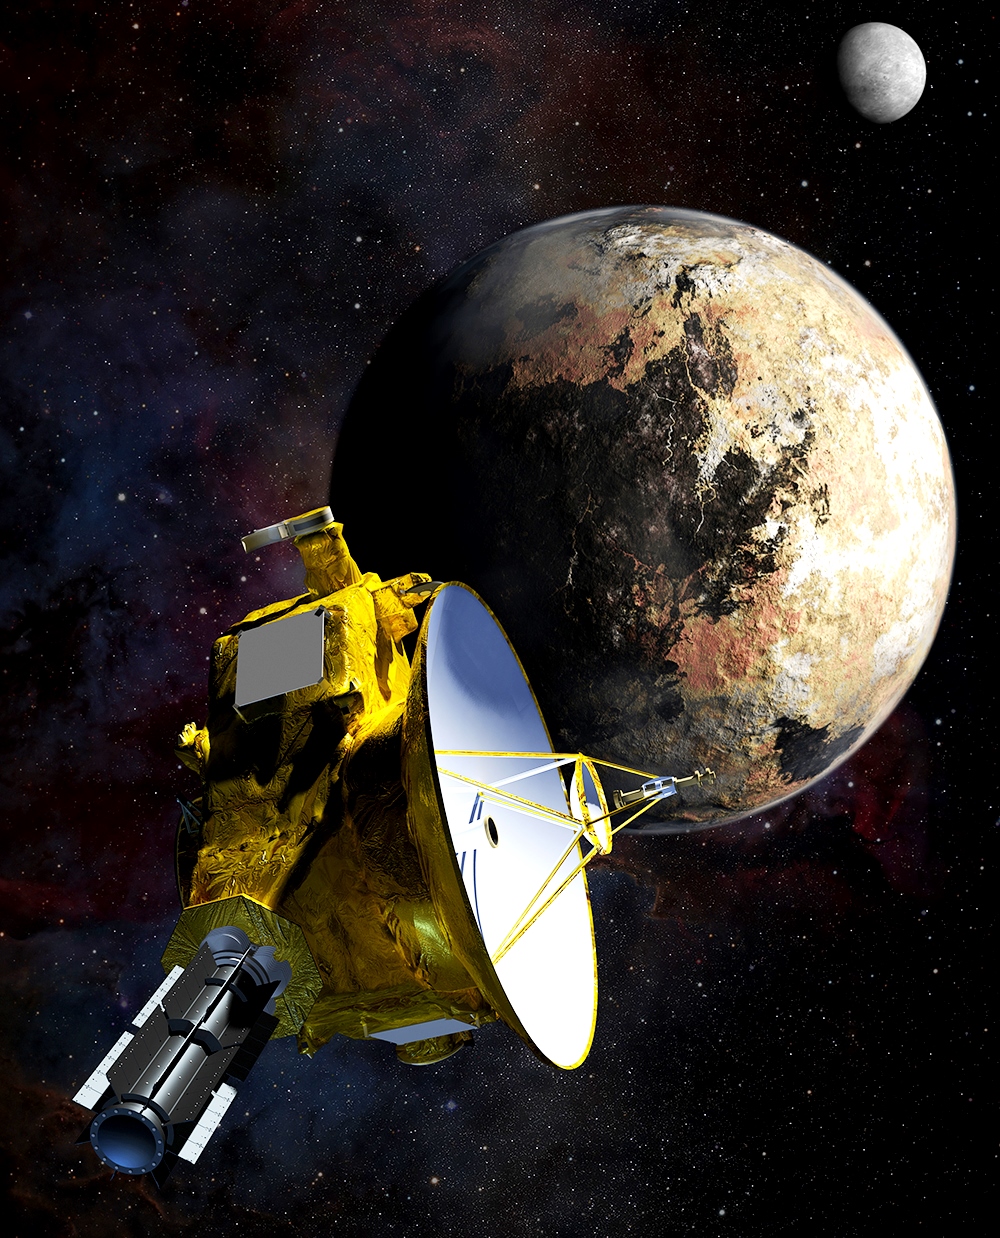 An artist's illustration of the New Horizons spacecraft in space.